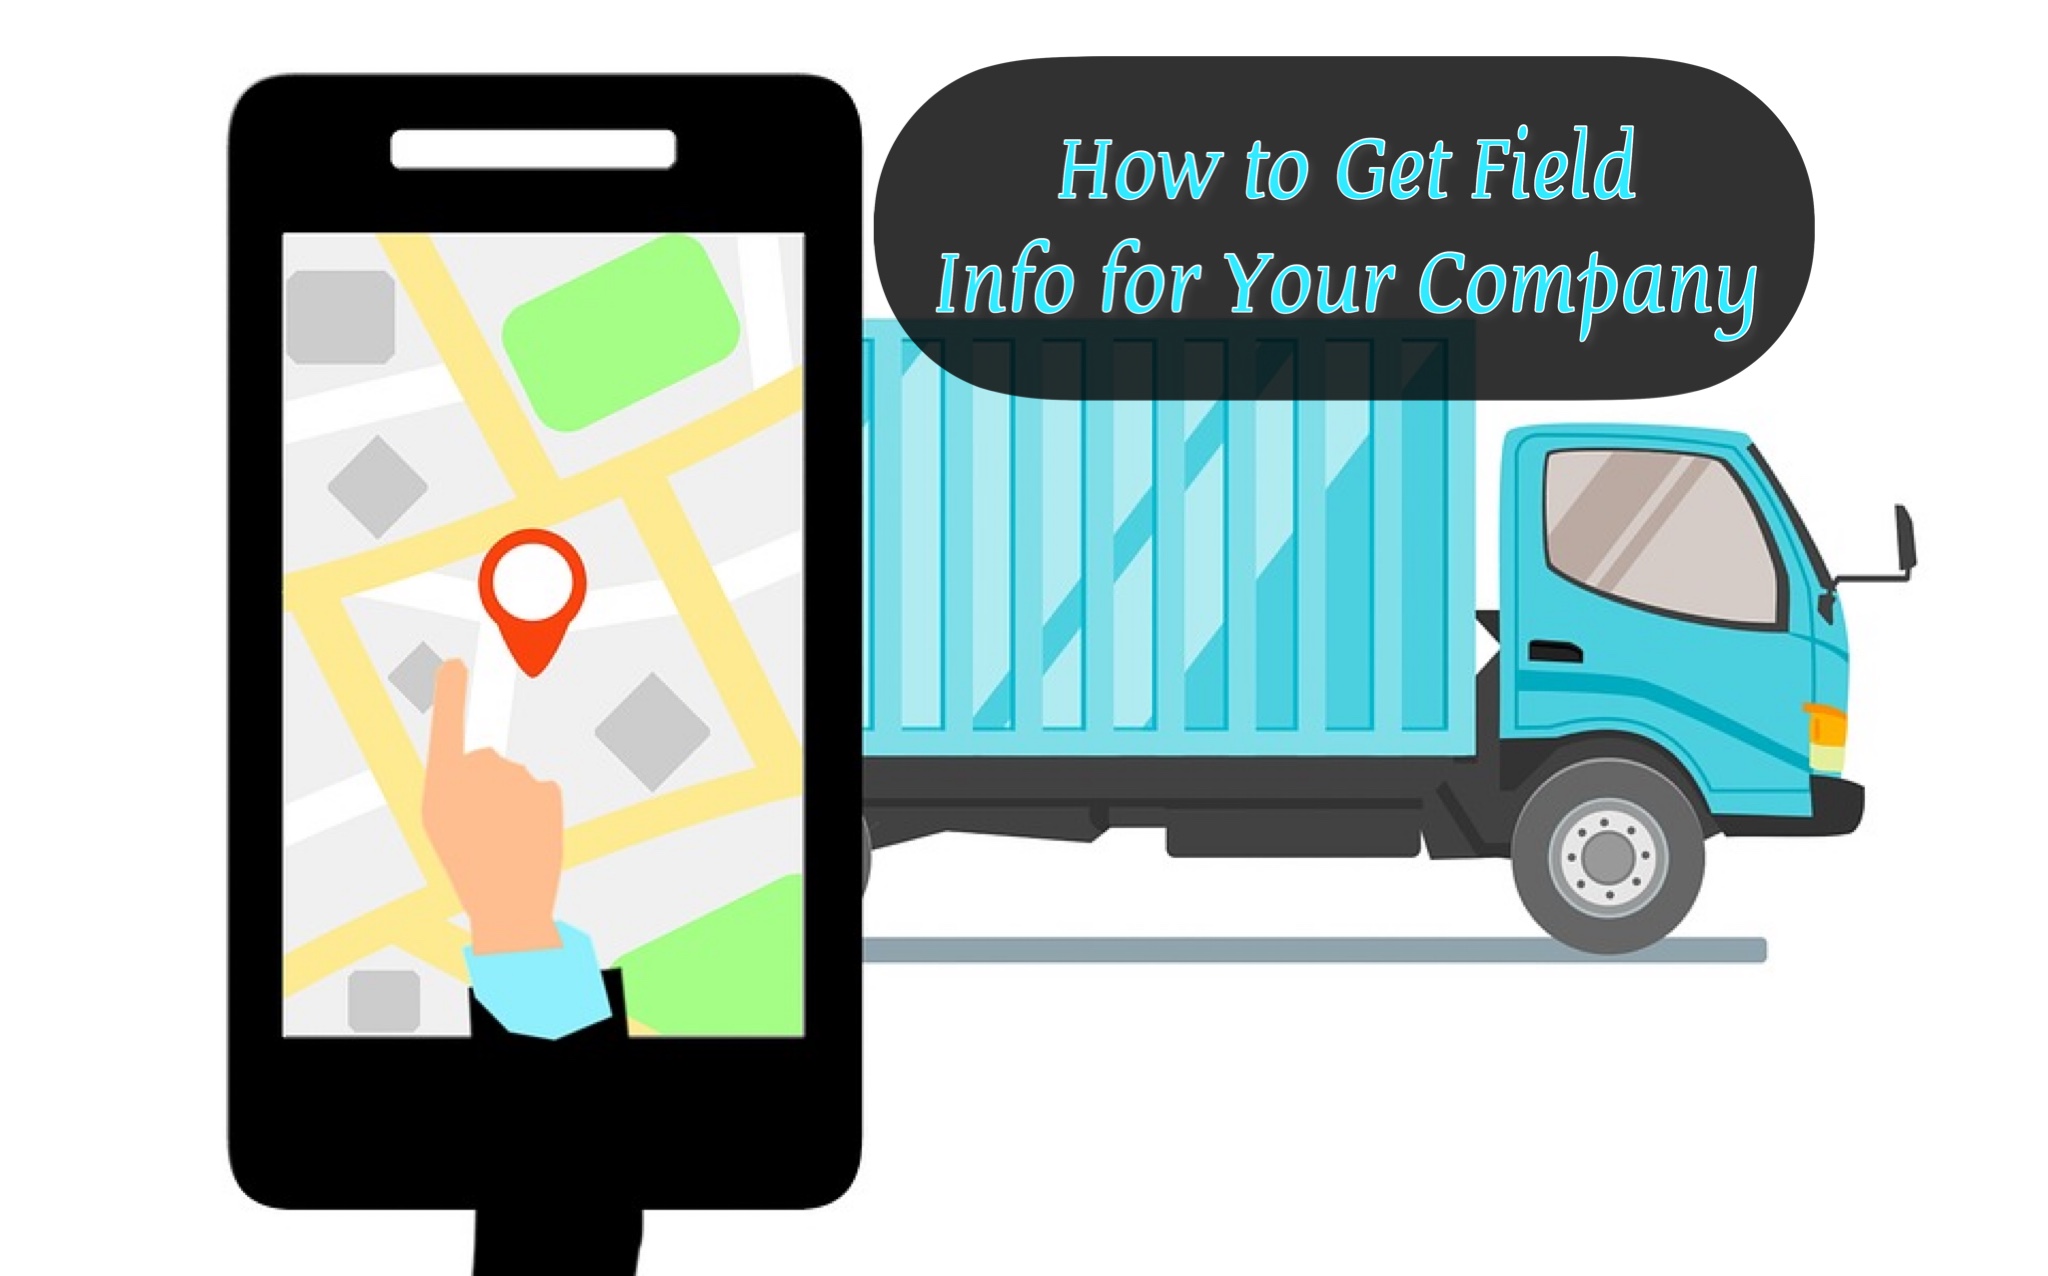 Knowing Is Half the Battle: How to Get Field Info for Your Company